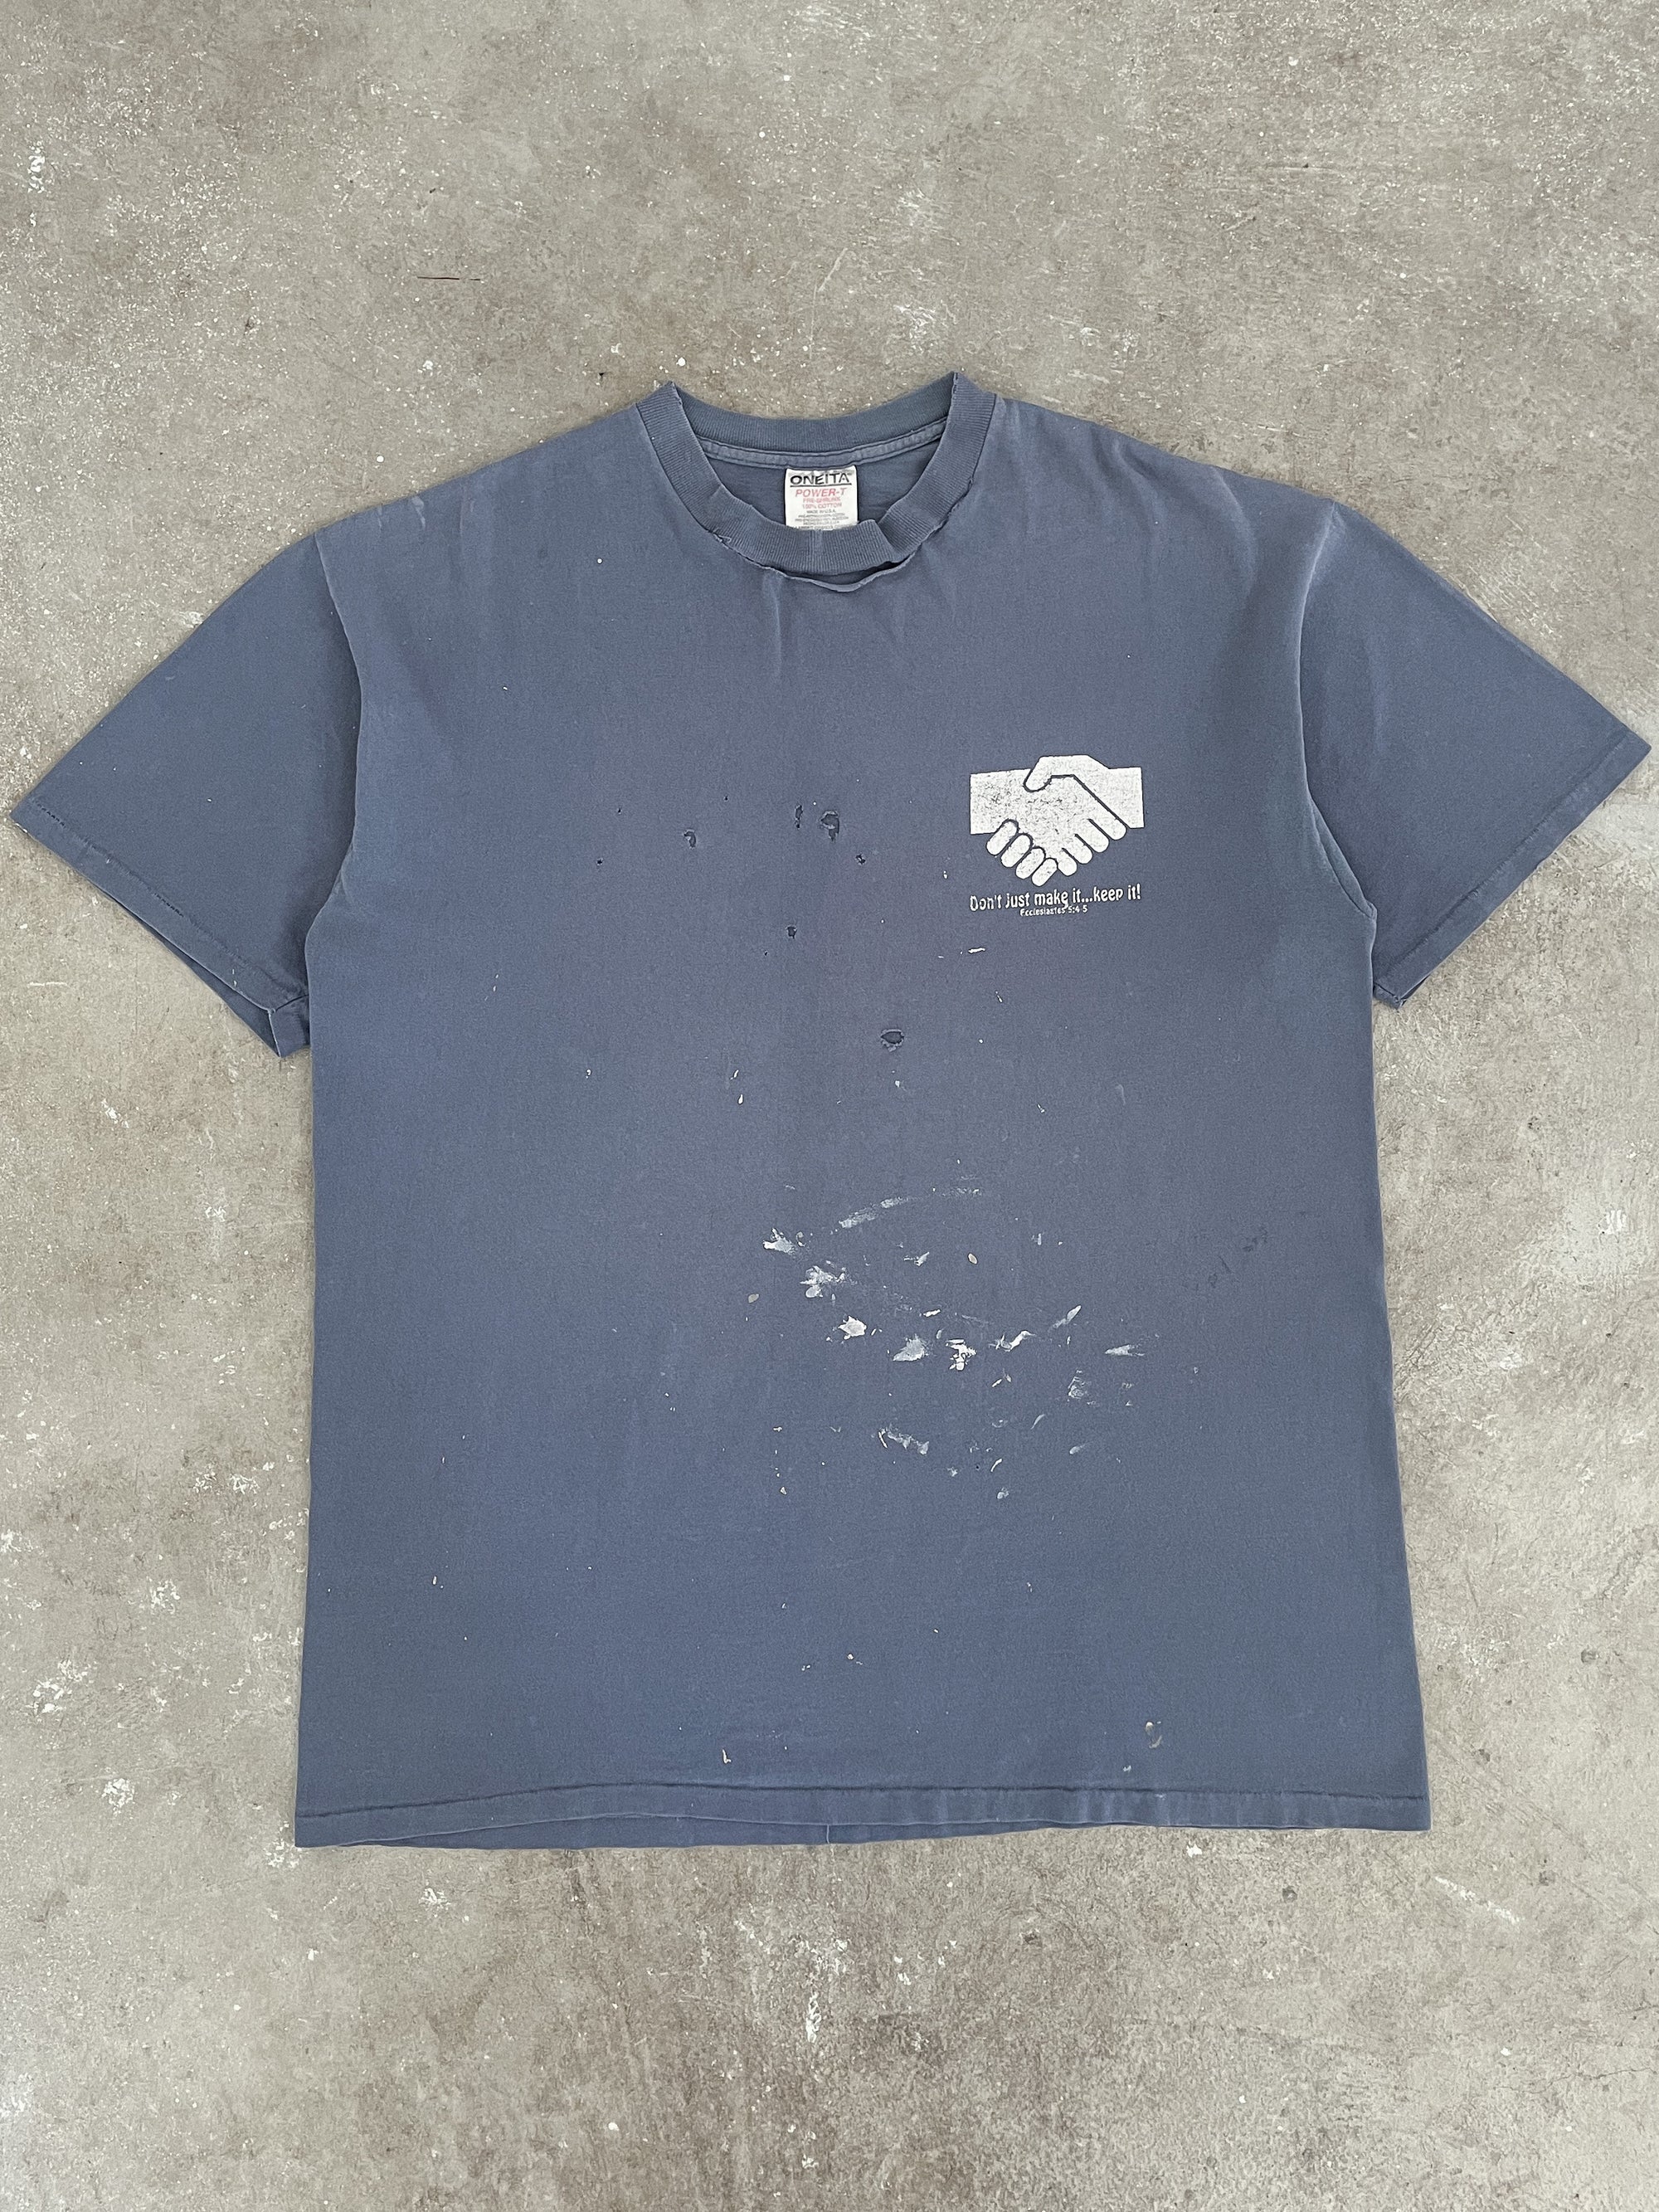 1990s “Promise Makers Jam” Painted Distressed Single Stitched Tee (XL)